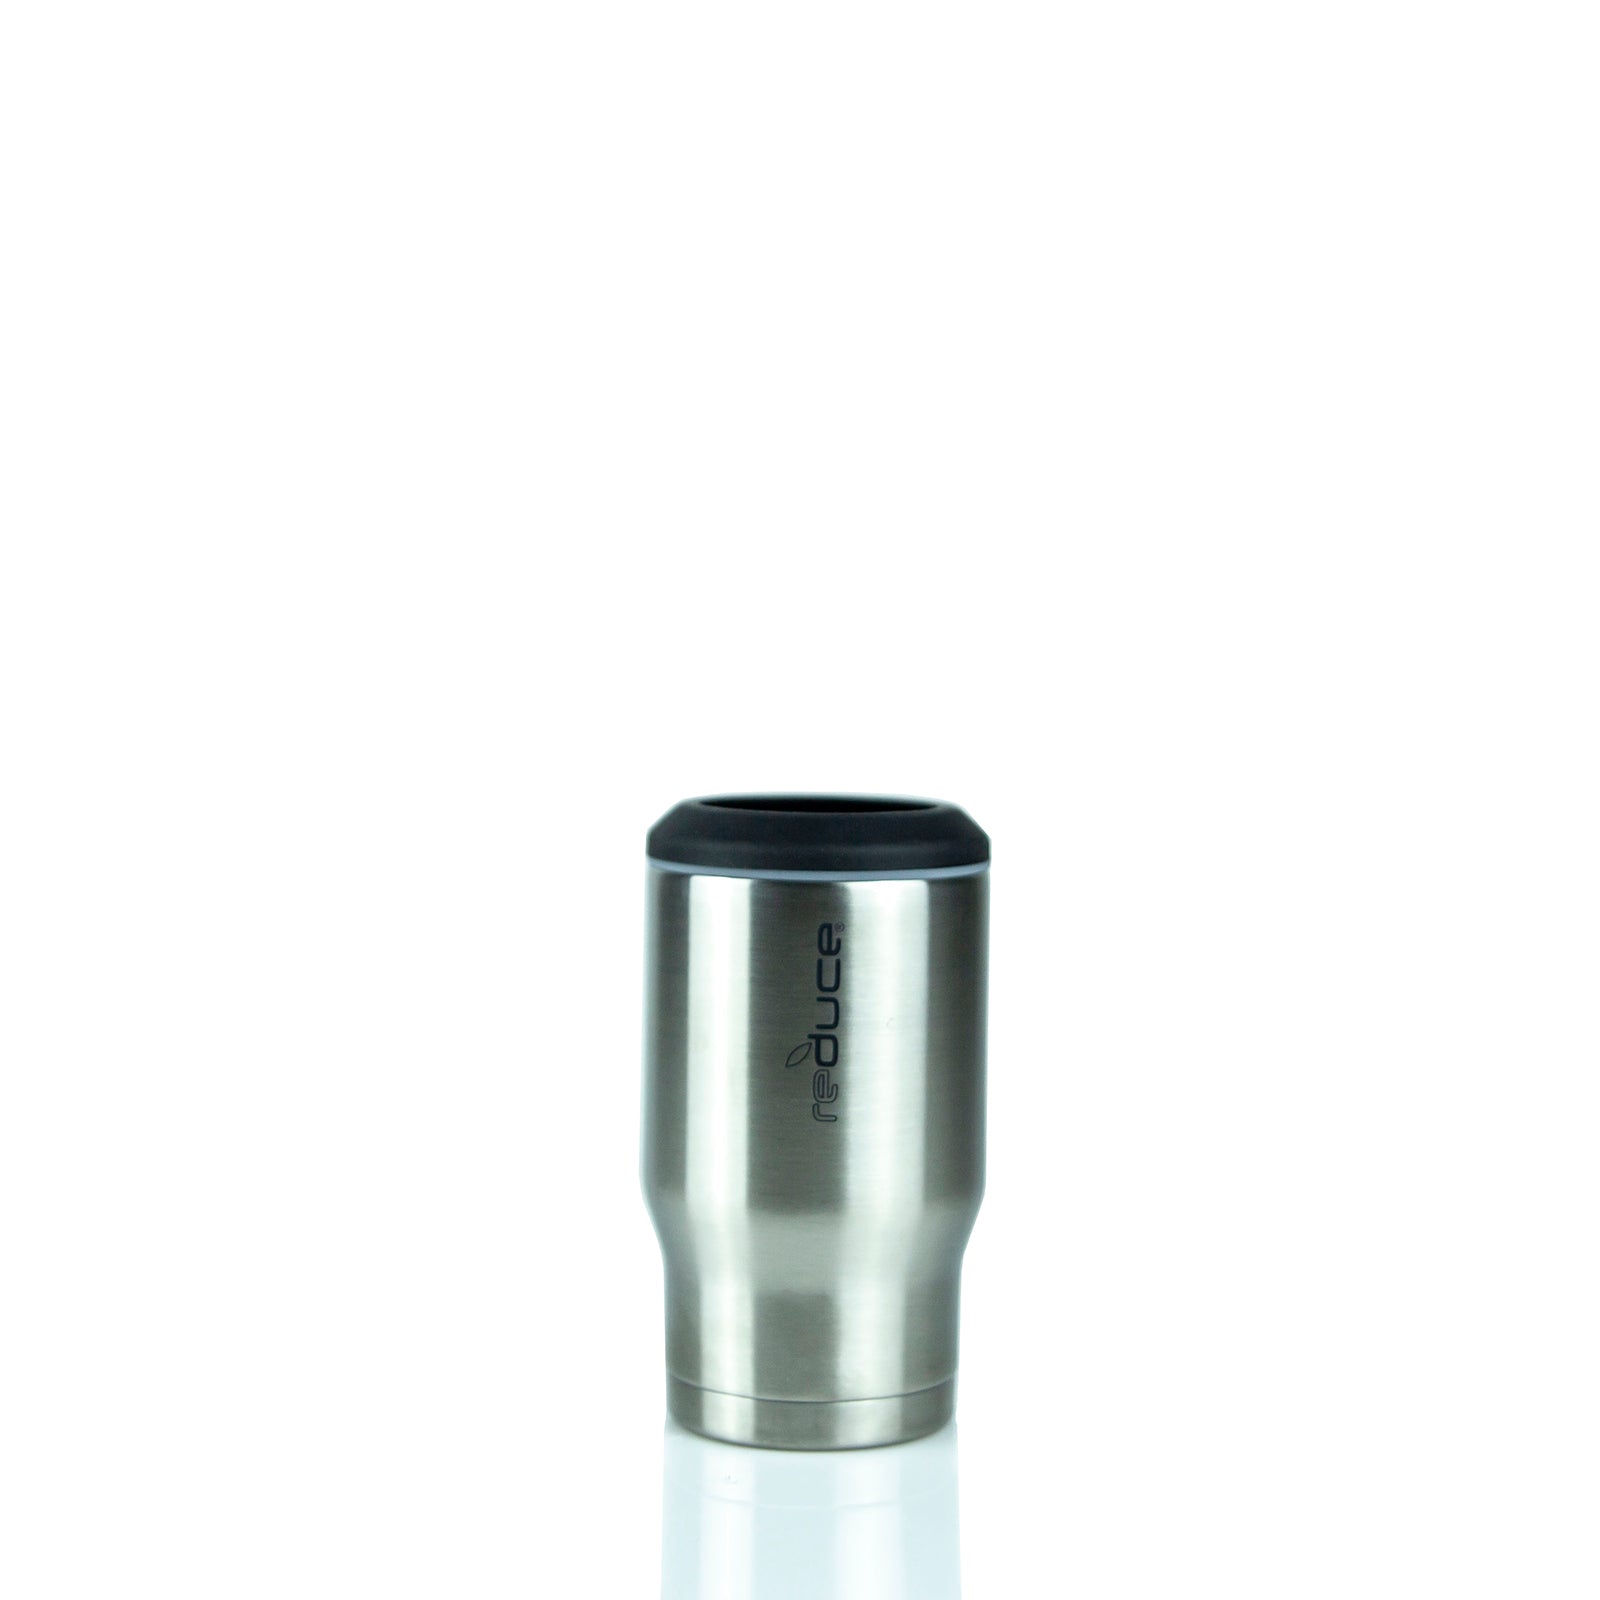 24 oz Stainless Steel Tumbler - Cold1 Collection